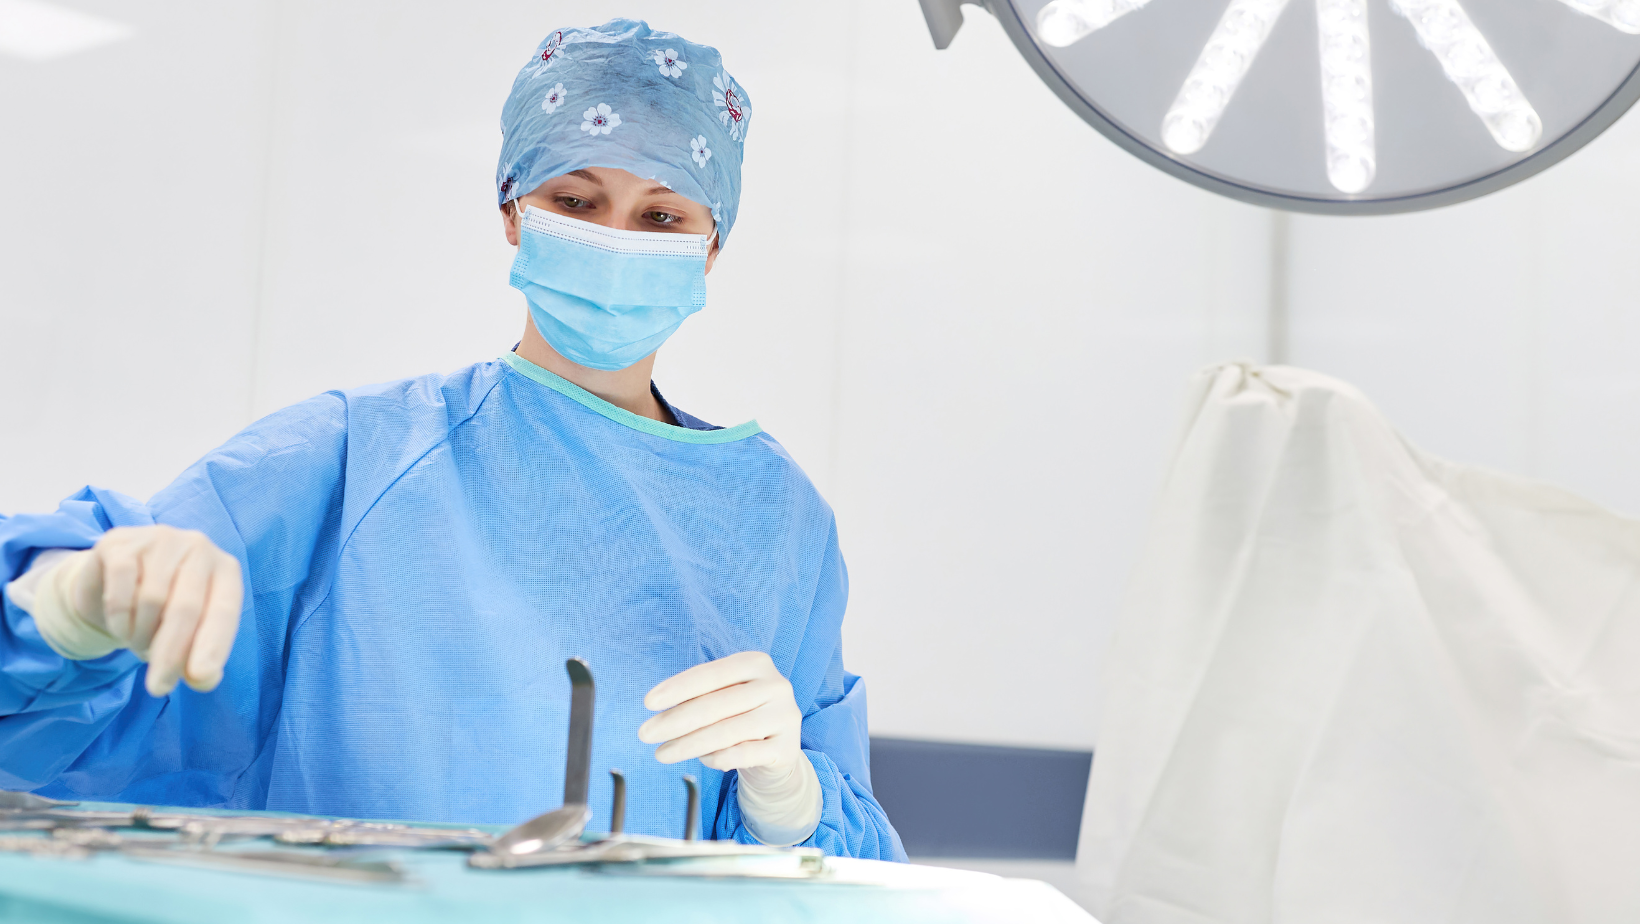 Essential Sterile Clothing Procedures for Maximum Safety & Precision